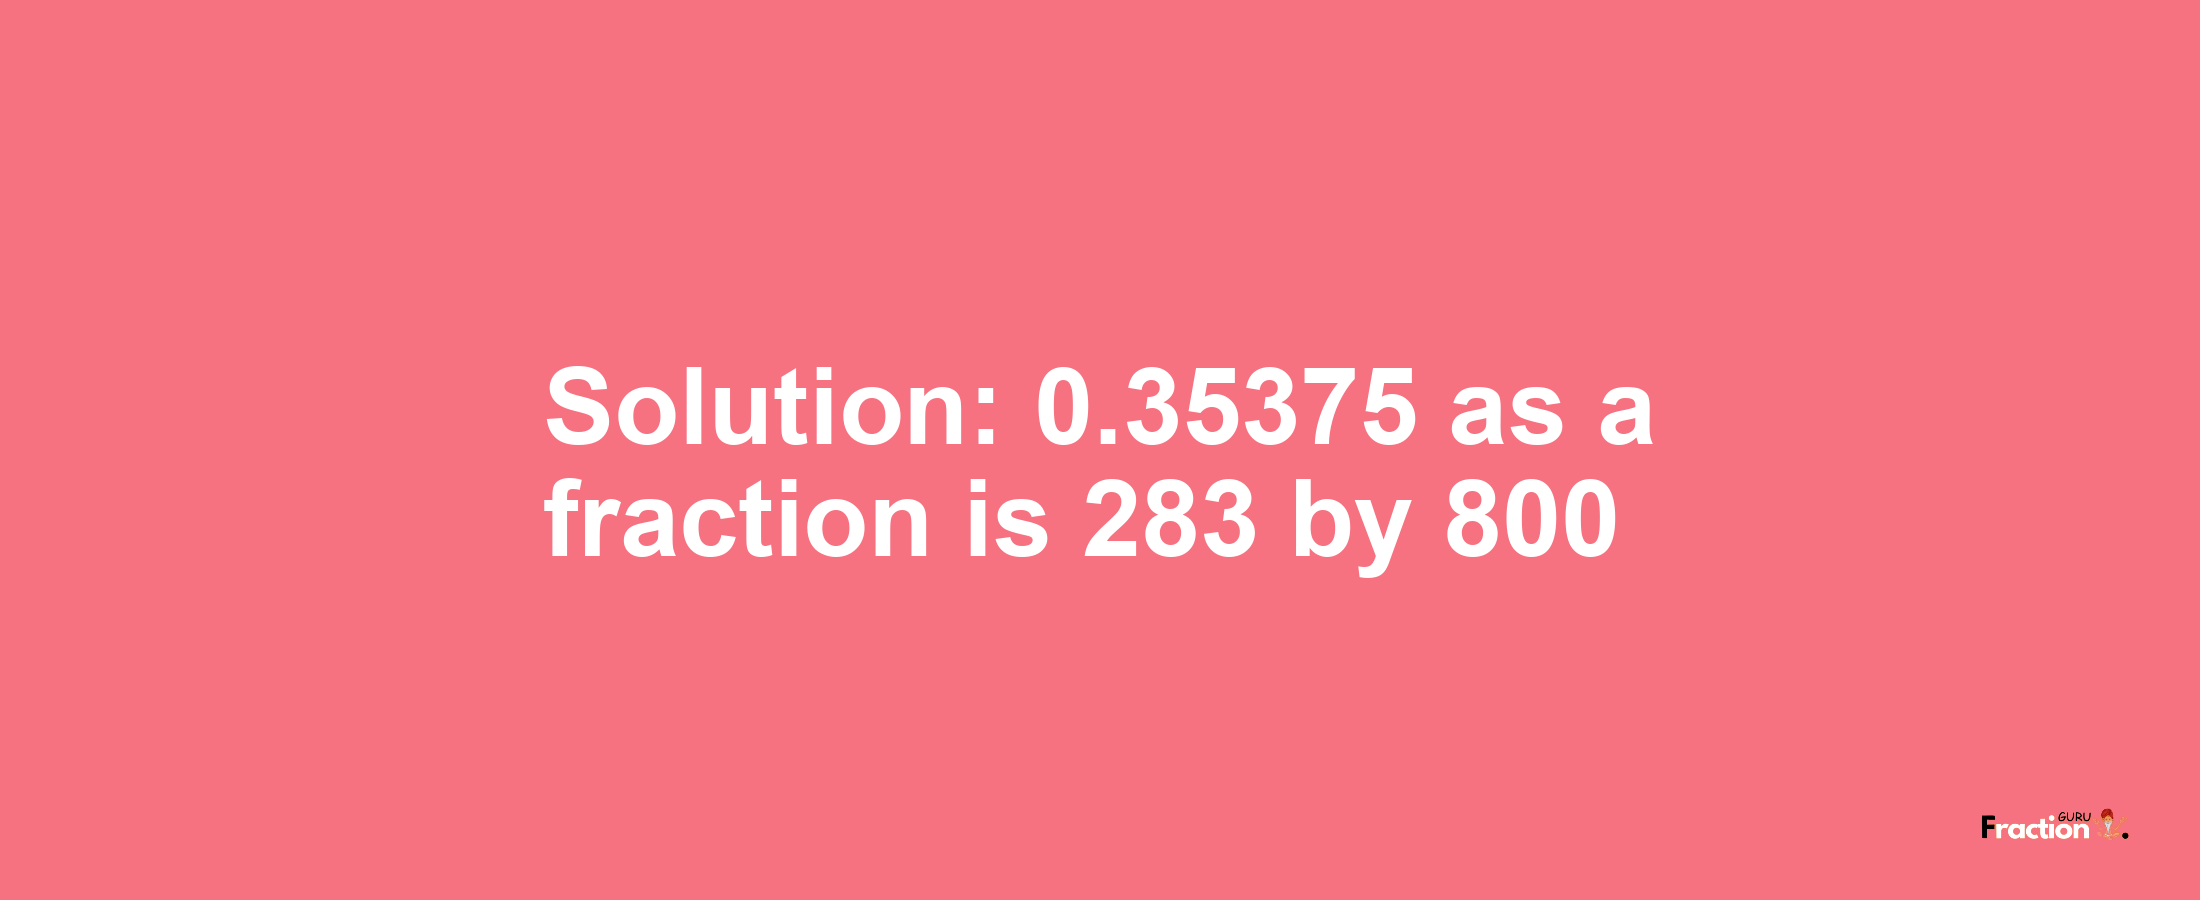 Solution:0.35375 as a fraction is 283/800